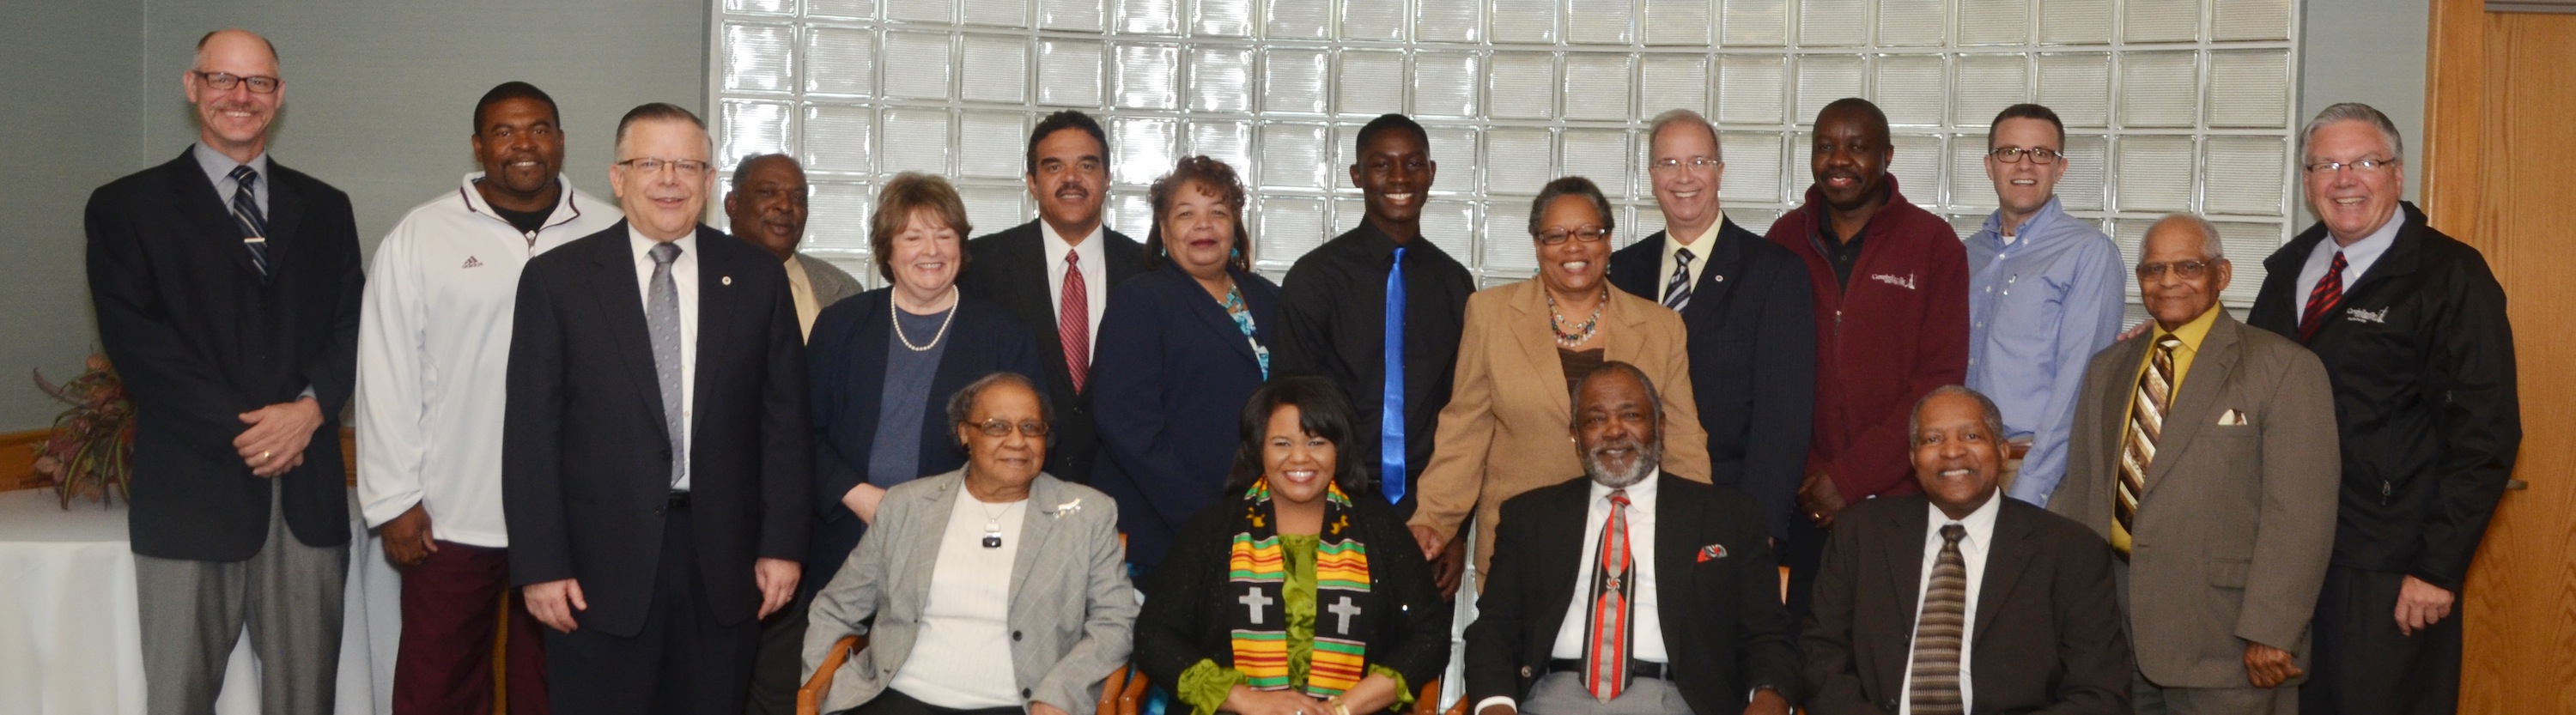 Members of Greater Campbellsville United joined the Campbellsville University Diversity Committee at a luncheon in honor of KET personality Renee Shaw Oct. 23 in the Chowning Executive Dining Room in the Winters Dining Hall after the annual Dialogue on Race chapel service. From left are: Front row – Jean Wickliffe, Shaw, the Rev. James Washington and the Rev. Michael Caldwell. Second row – John Chowning, vice president for church and external relations and executive assistant to the president; Linda Waggener, Minister Pam Buford, Wanda Washington and Sam Wickliffe. Back row – Dr. Roscoe Bowen, Perry Thomas, Jerry Cowherd, Terry Allen, William Pearson, Dr. Michael V. Carter, Dr. Japheth Jaoko, Ron McMahan and Dr. Keith Spears. (Campbellsville University Photo by Joan C. McKinney)